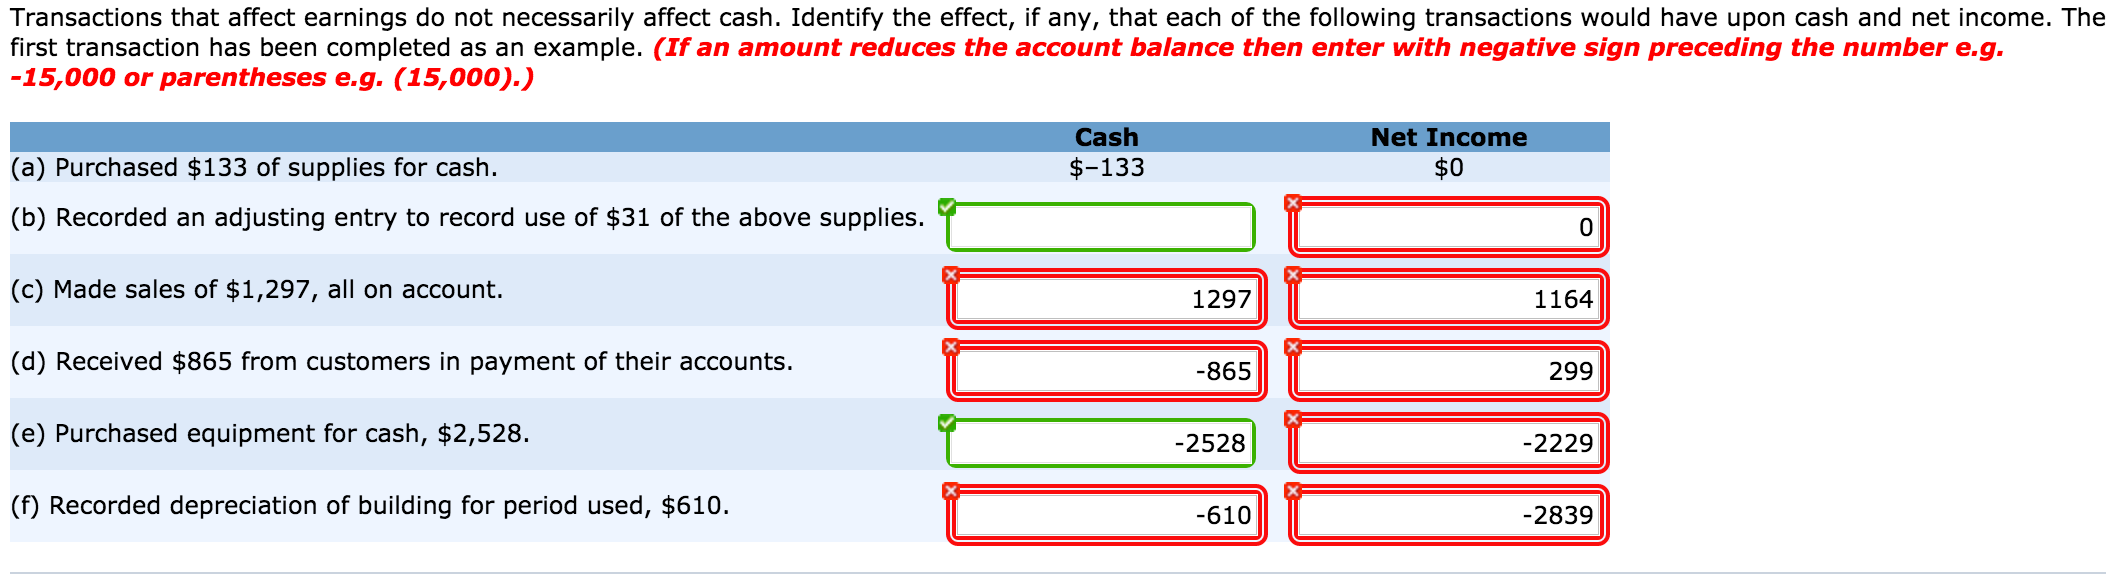 Transactions that affect earnings do not necessarily affect cash. identify the effect, if any, that each of the following transactions would have upon cash and net income. the first transaction has been completed as an example. (if an amount reduces the account balance then enter with negative sign preceding the number e.g 15,000 or parentheses e.g. (15,000). cash $-133 net income $0 (a) purchased $133 of supplies for cash. (b) recorded an adjusting entry to record use of $31 of the above supplies. (c) made sales of $1,297, all on account. (d) received $865 from customers in payment of their accounts. (e) purchased equipment for cash, $2,528 () recorded depreciation of building for period used, $610. 0 1297 1164 865 299 2528 2229 610 2839